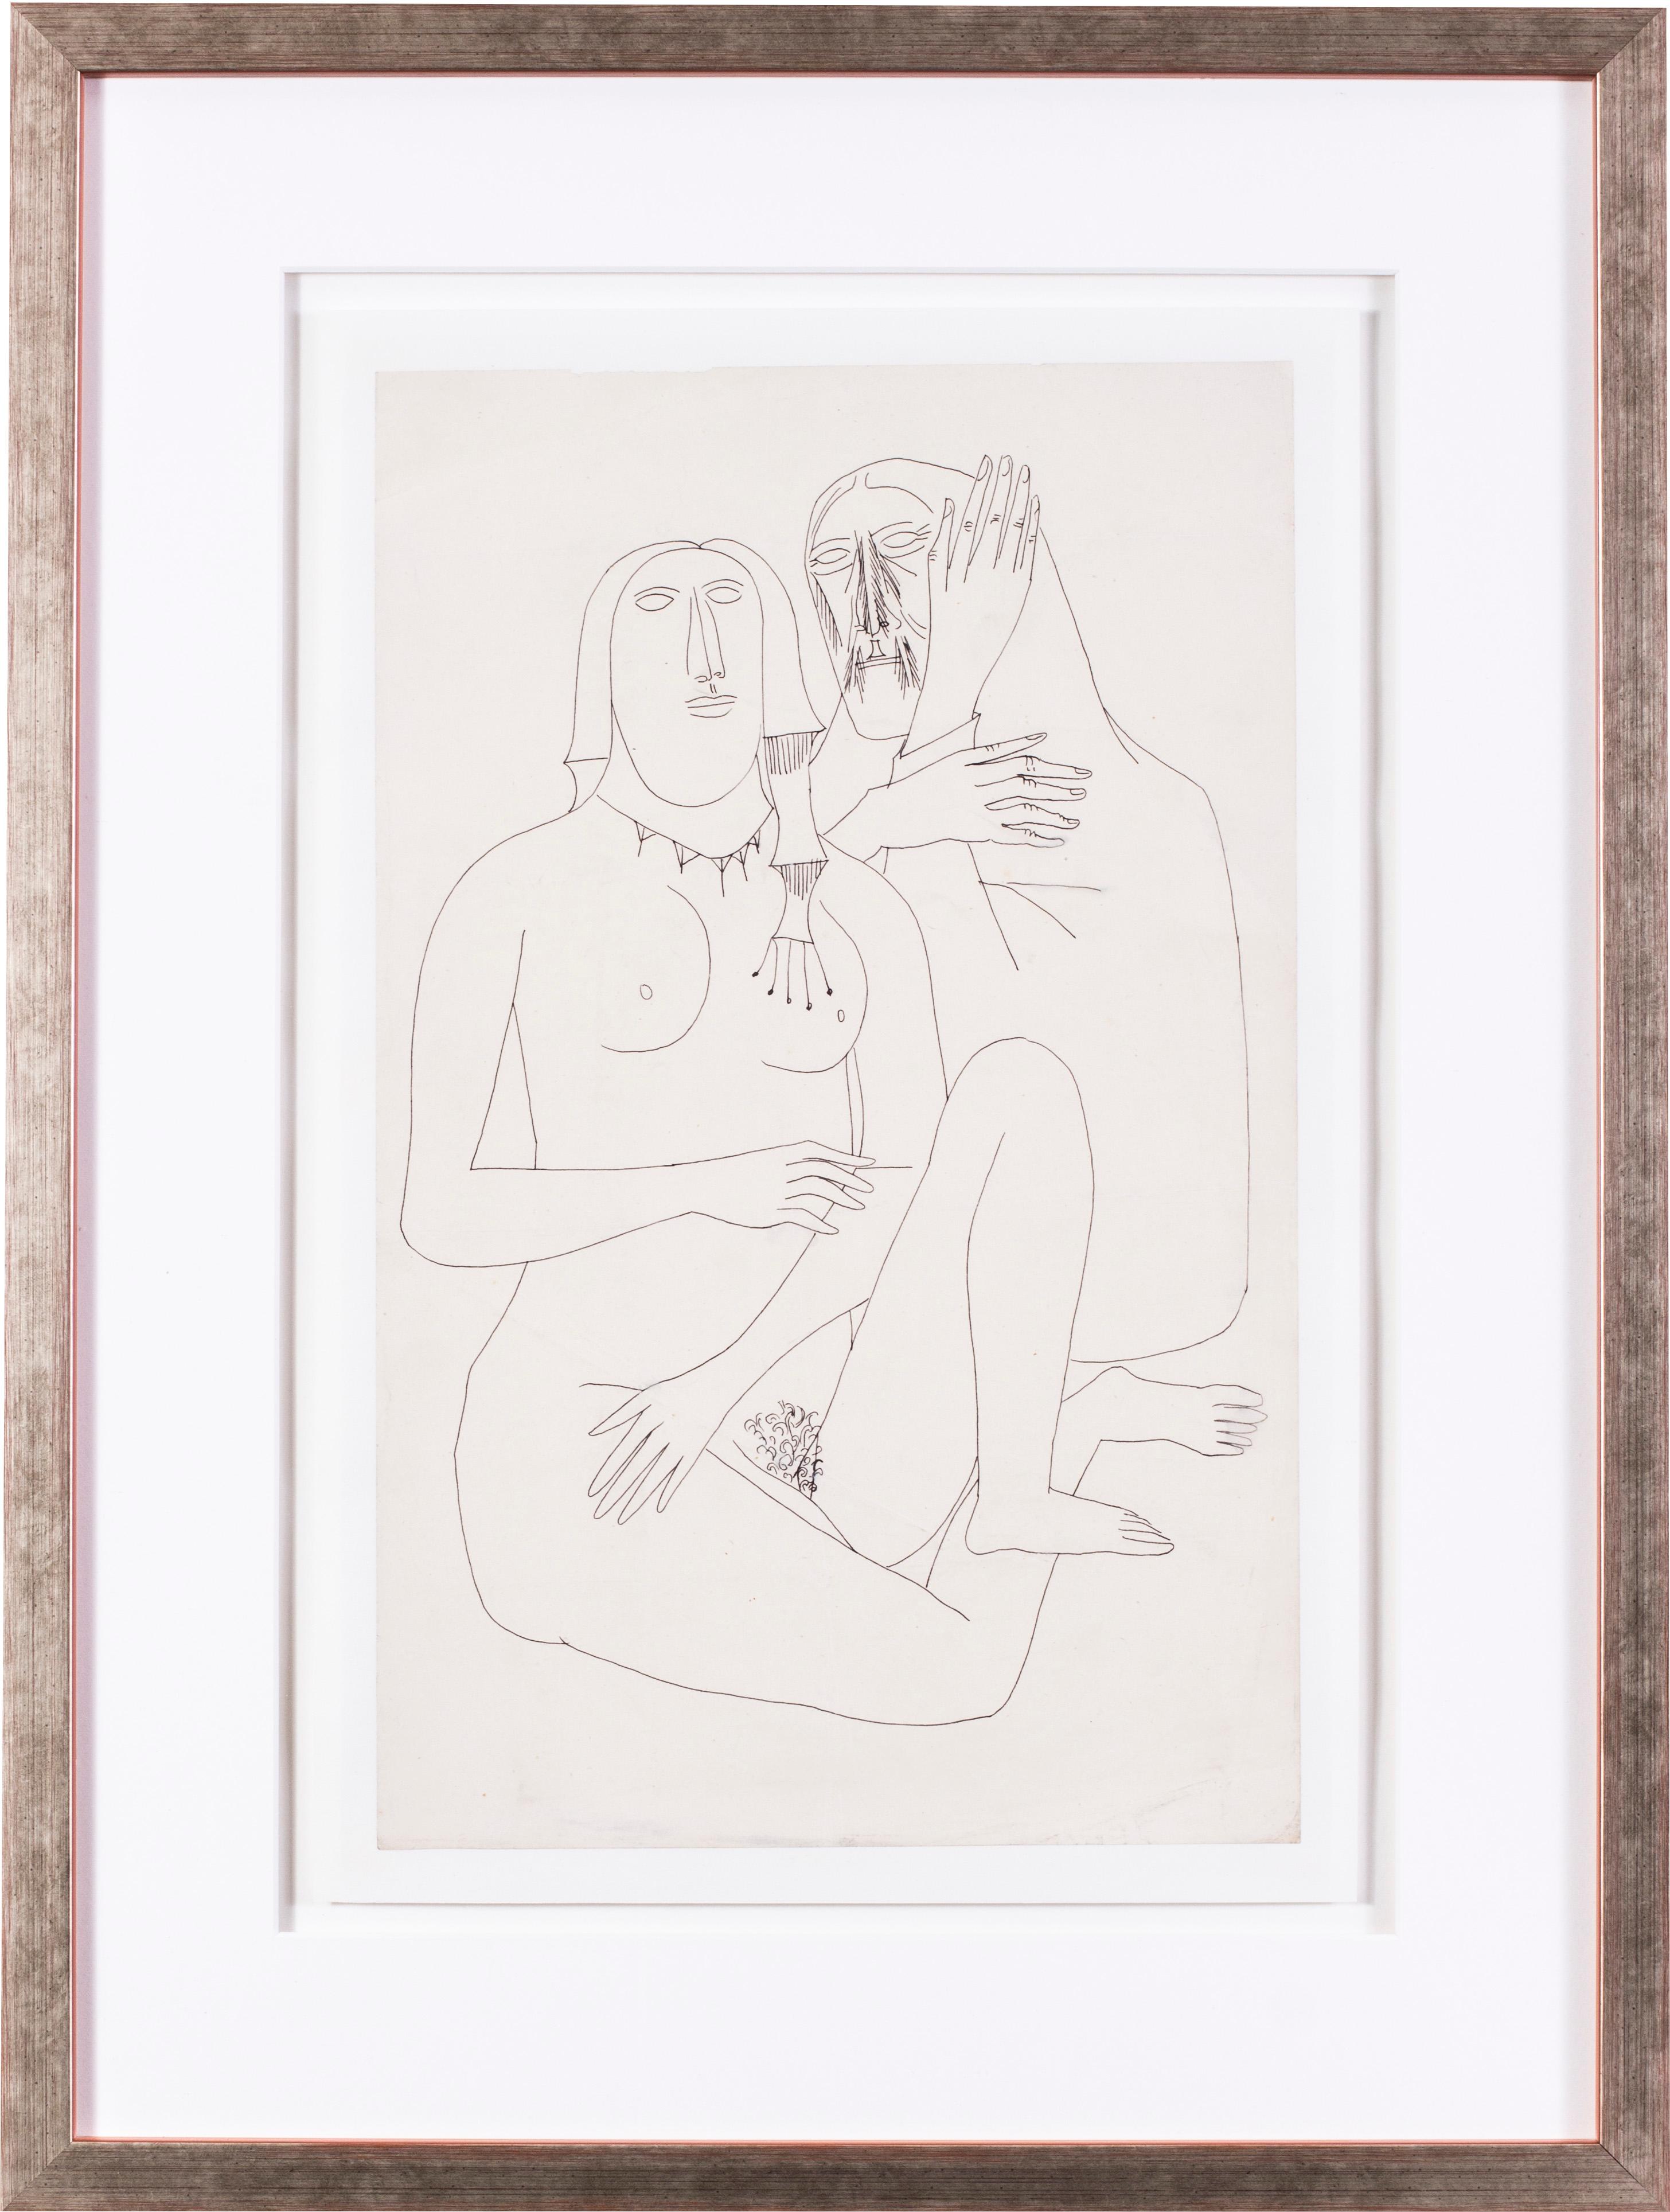 Souza, Indian 20th Century artist, drawing of two nudes